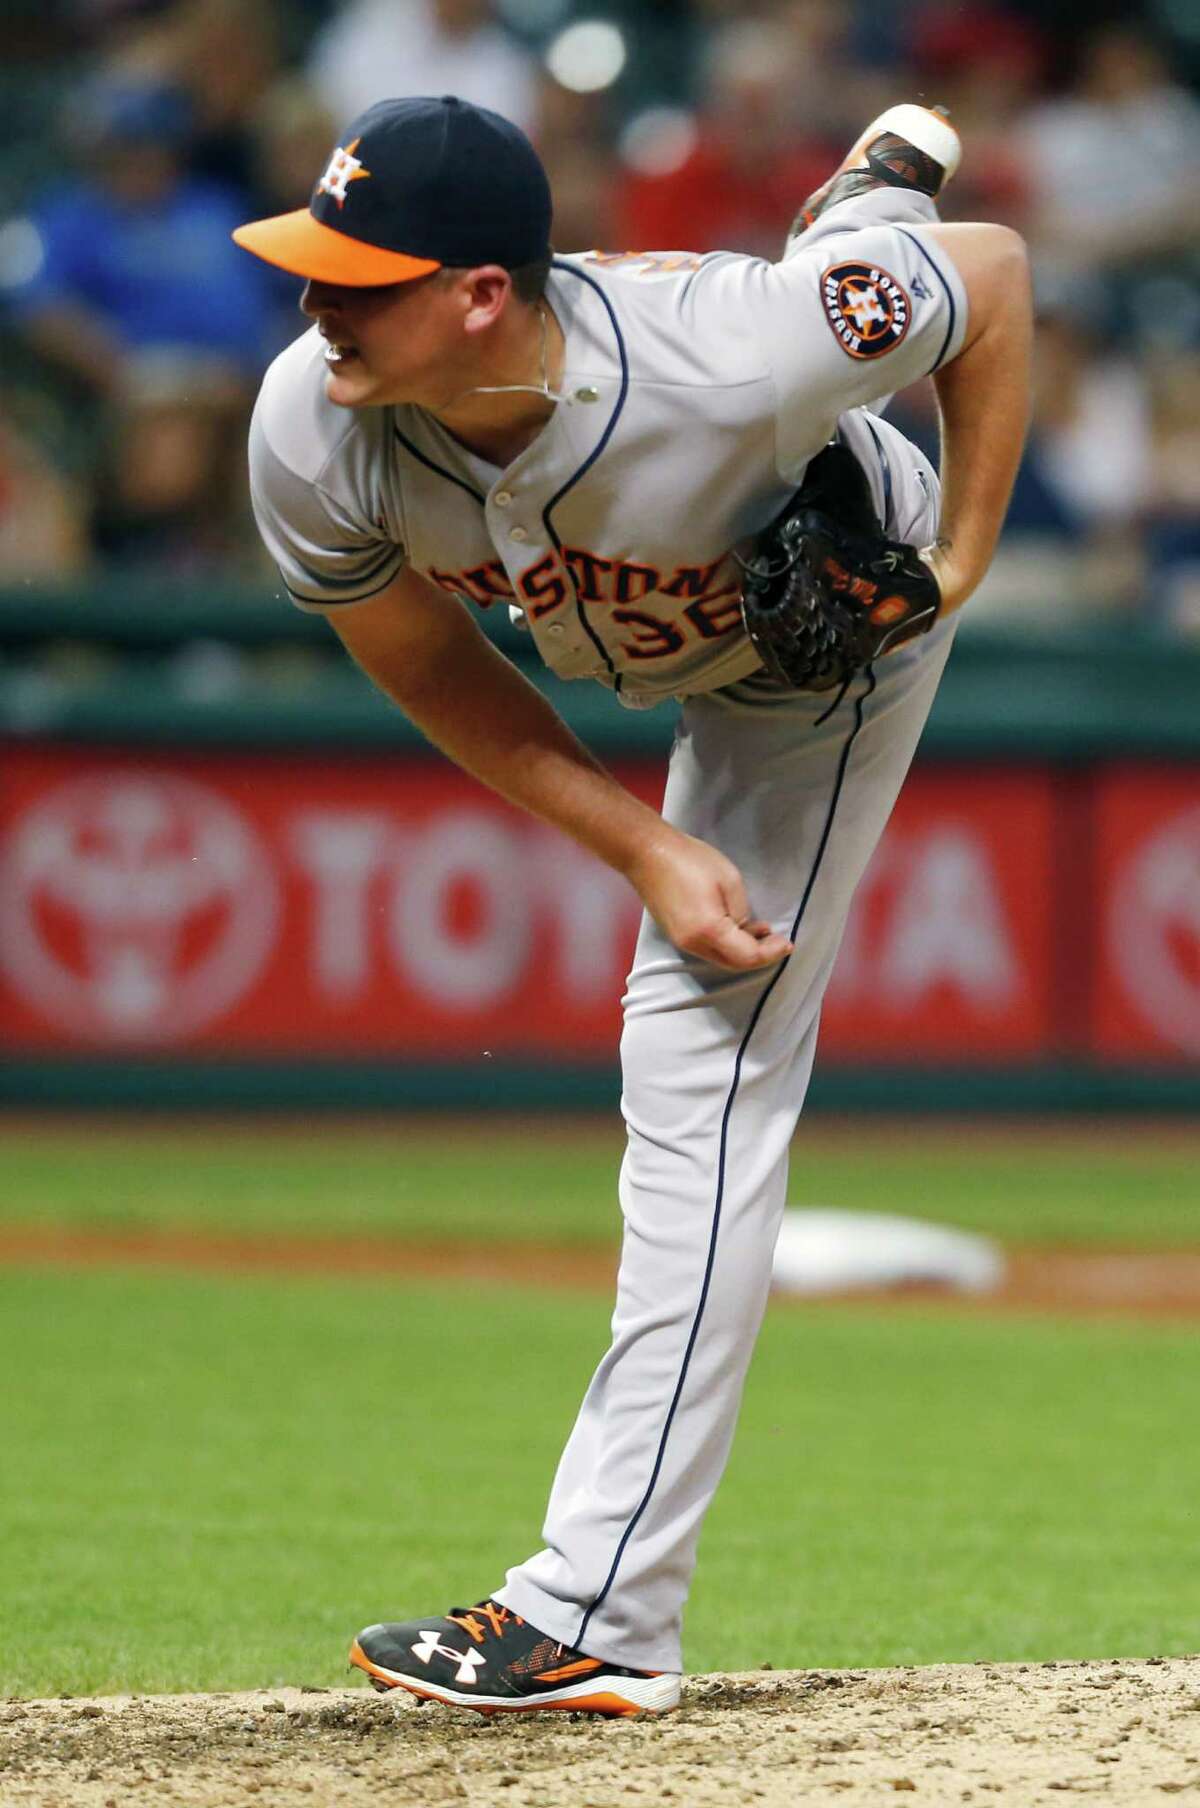 Houston Astros relief pitcher Will Harris deilvers against the Cleveland Indians during the seventh inning of a baseball game Tuesday, Sept. 6, 2016, in Cleveland. (AP Photo/Ron Schwane)